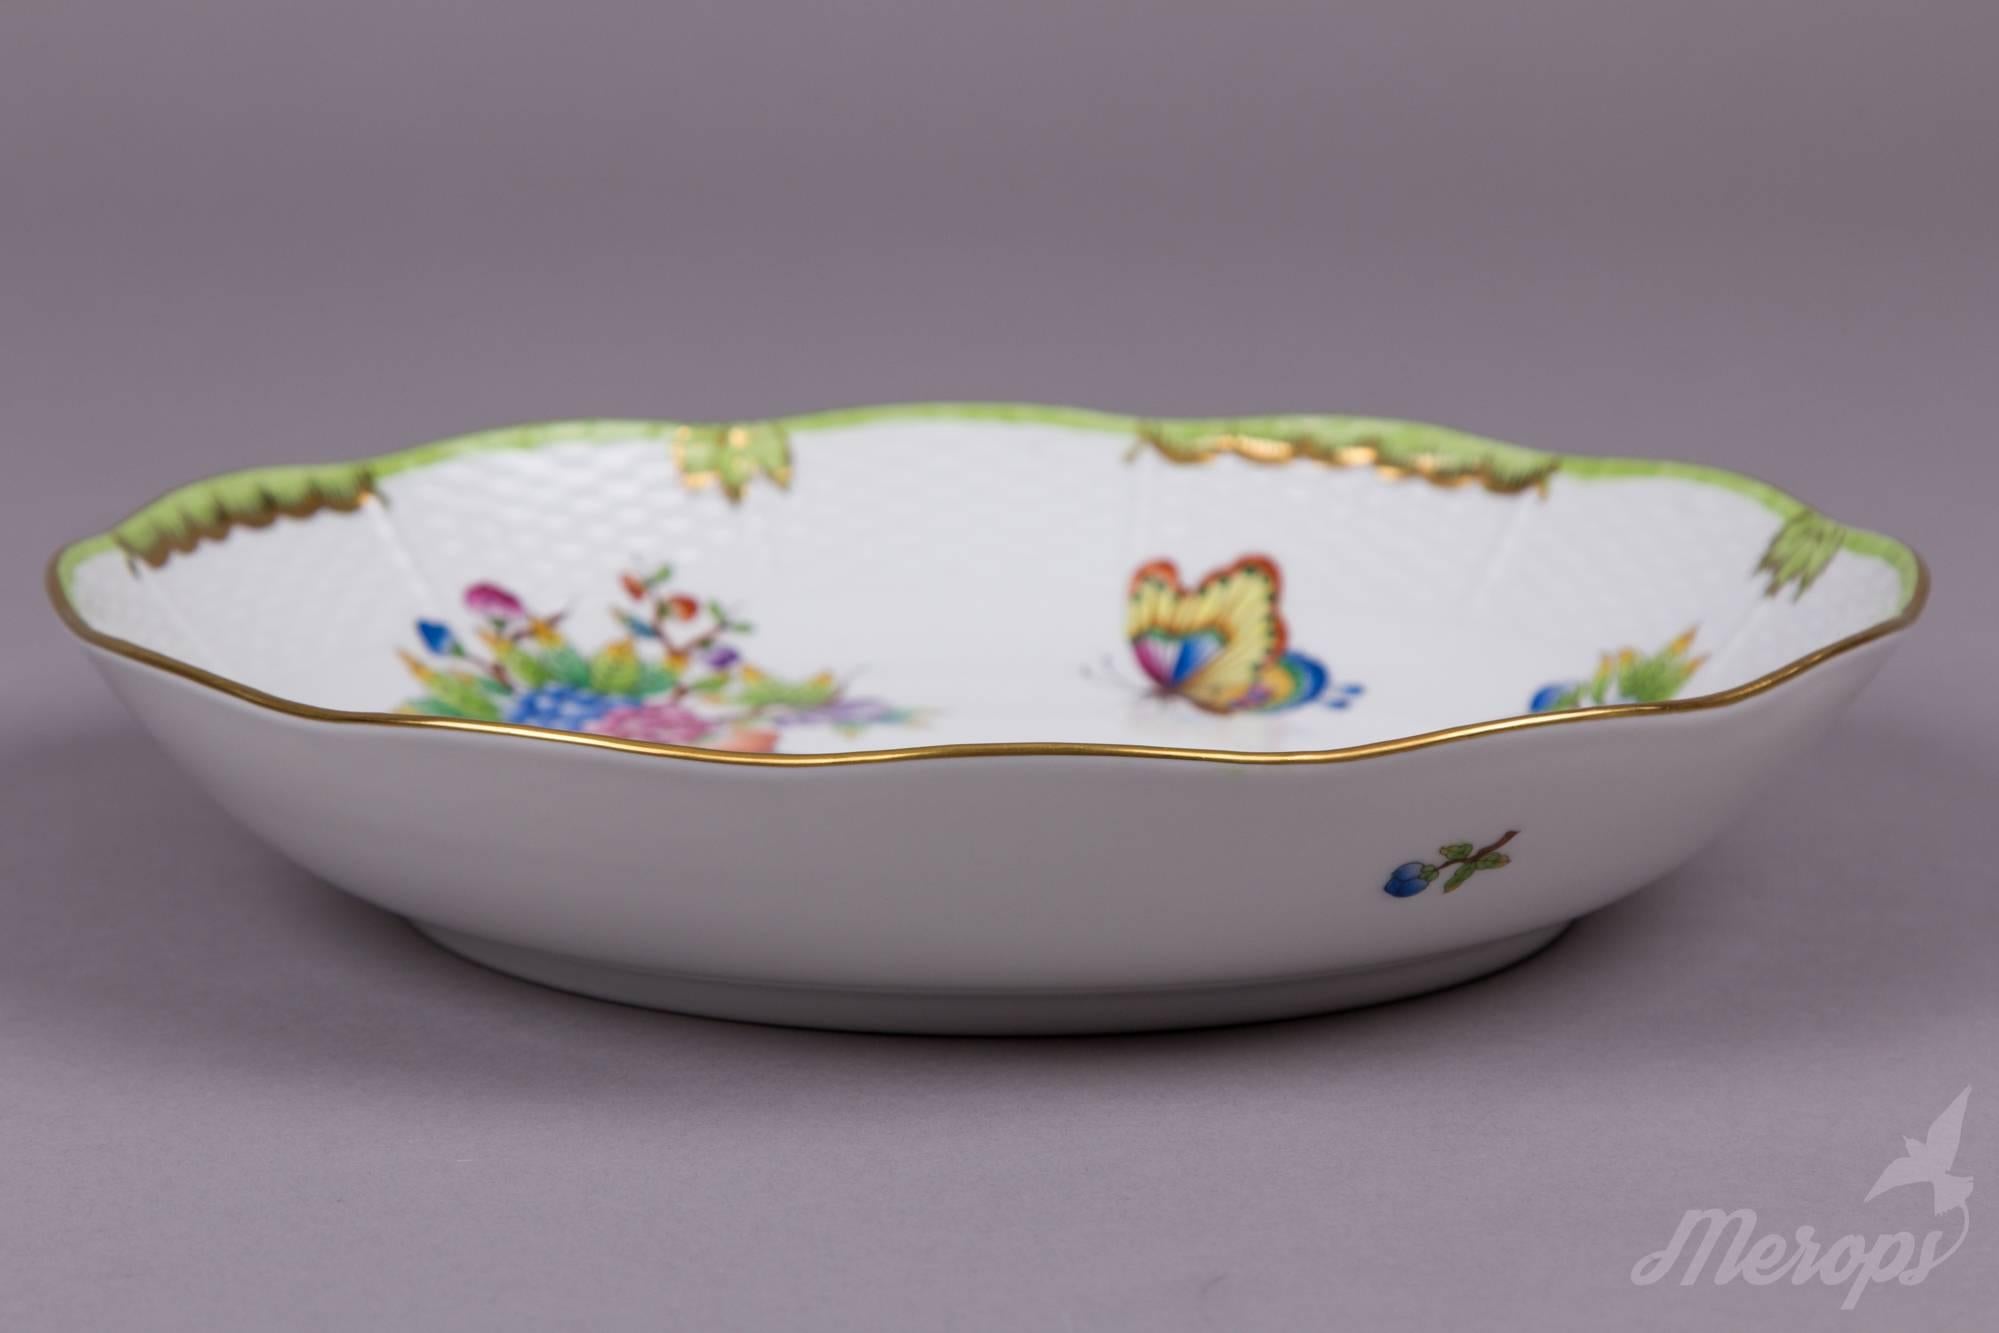 We ship this item worldwide for 30 USD with insurance. Shipping usually takes 5-10 business days. Express shipping with FedEx (1-2 days) available for 60 USD.

Manufacturer: Herend Porcelain Manufactory (Hungary).
Quality: Handpainted, 1st